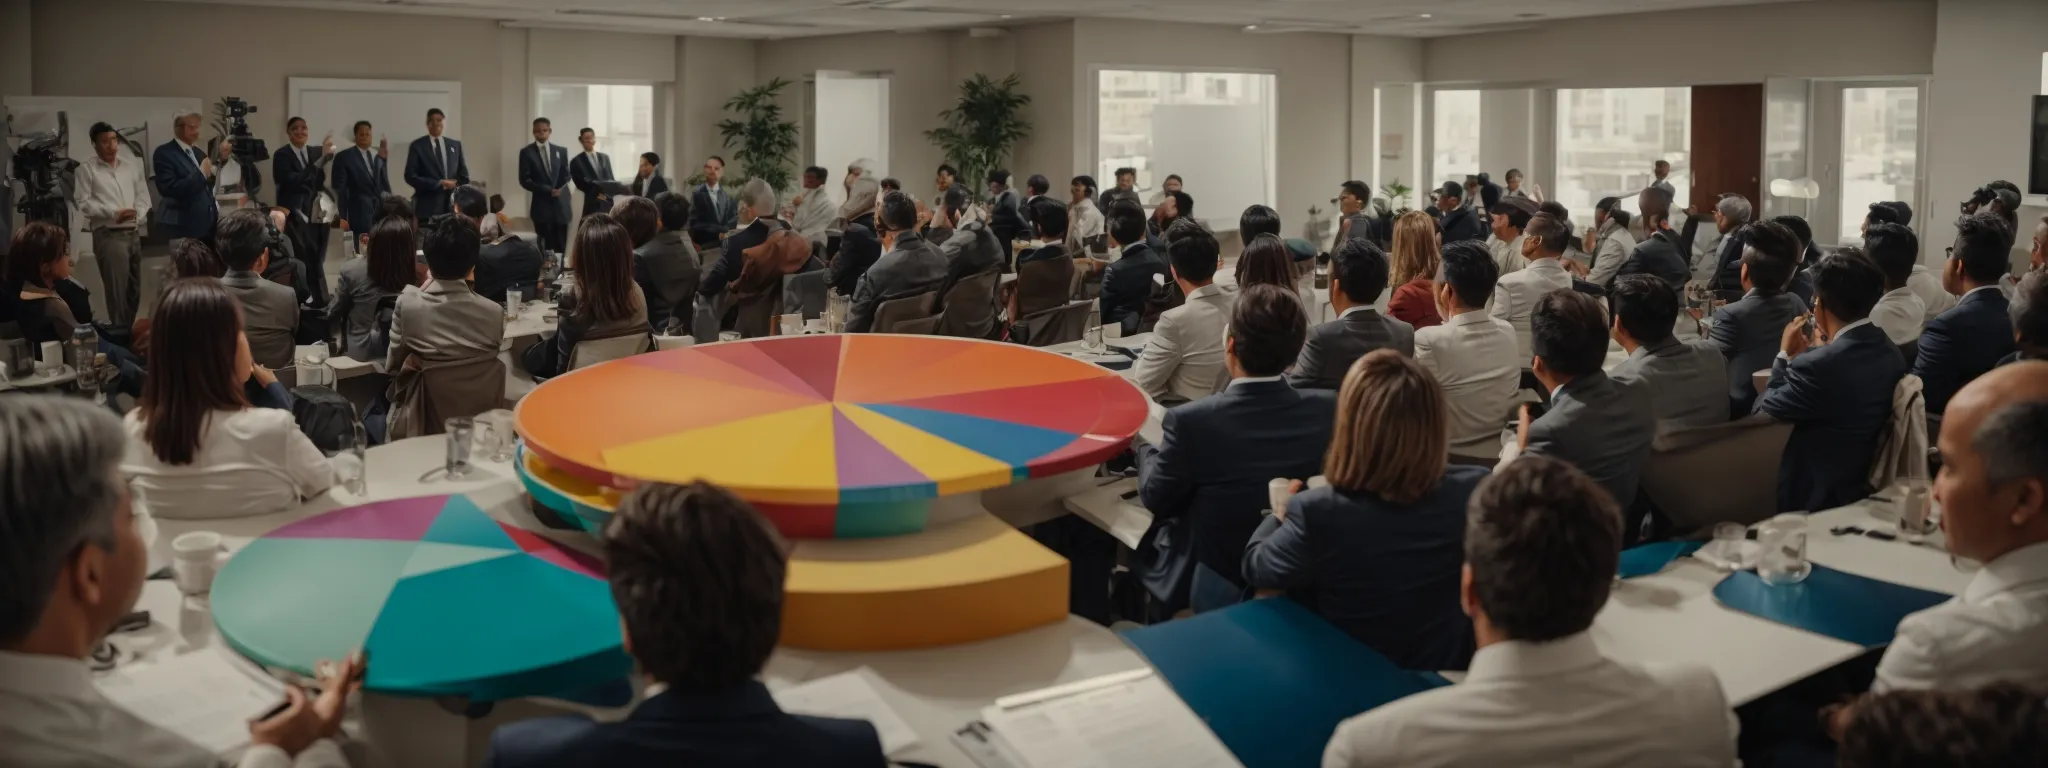 a strategist presents a colorful pie chart to a roomful of attentive marketers discussing a comprehensive campaign plan.